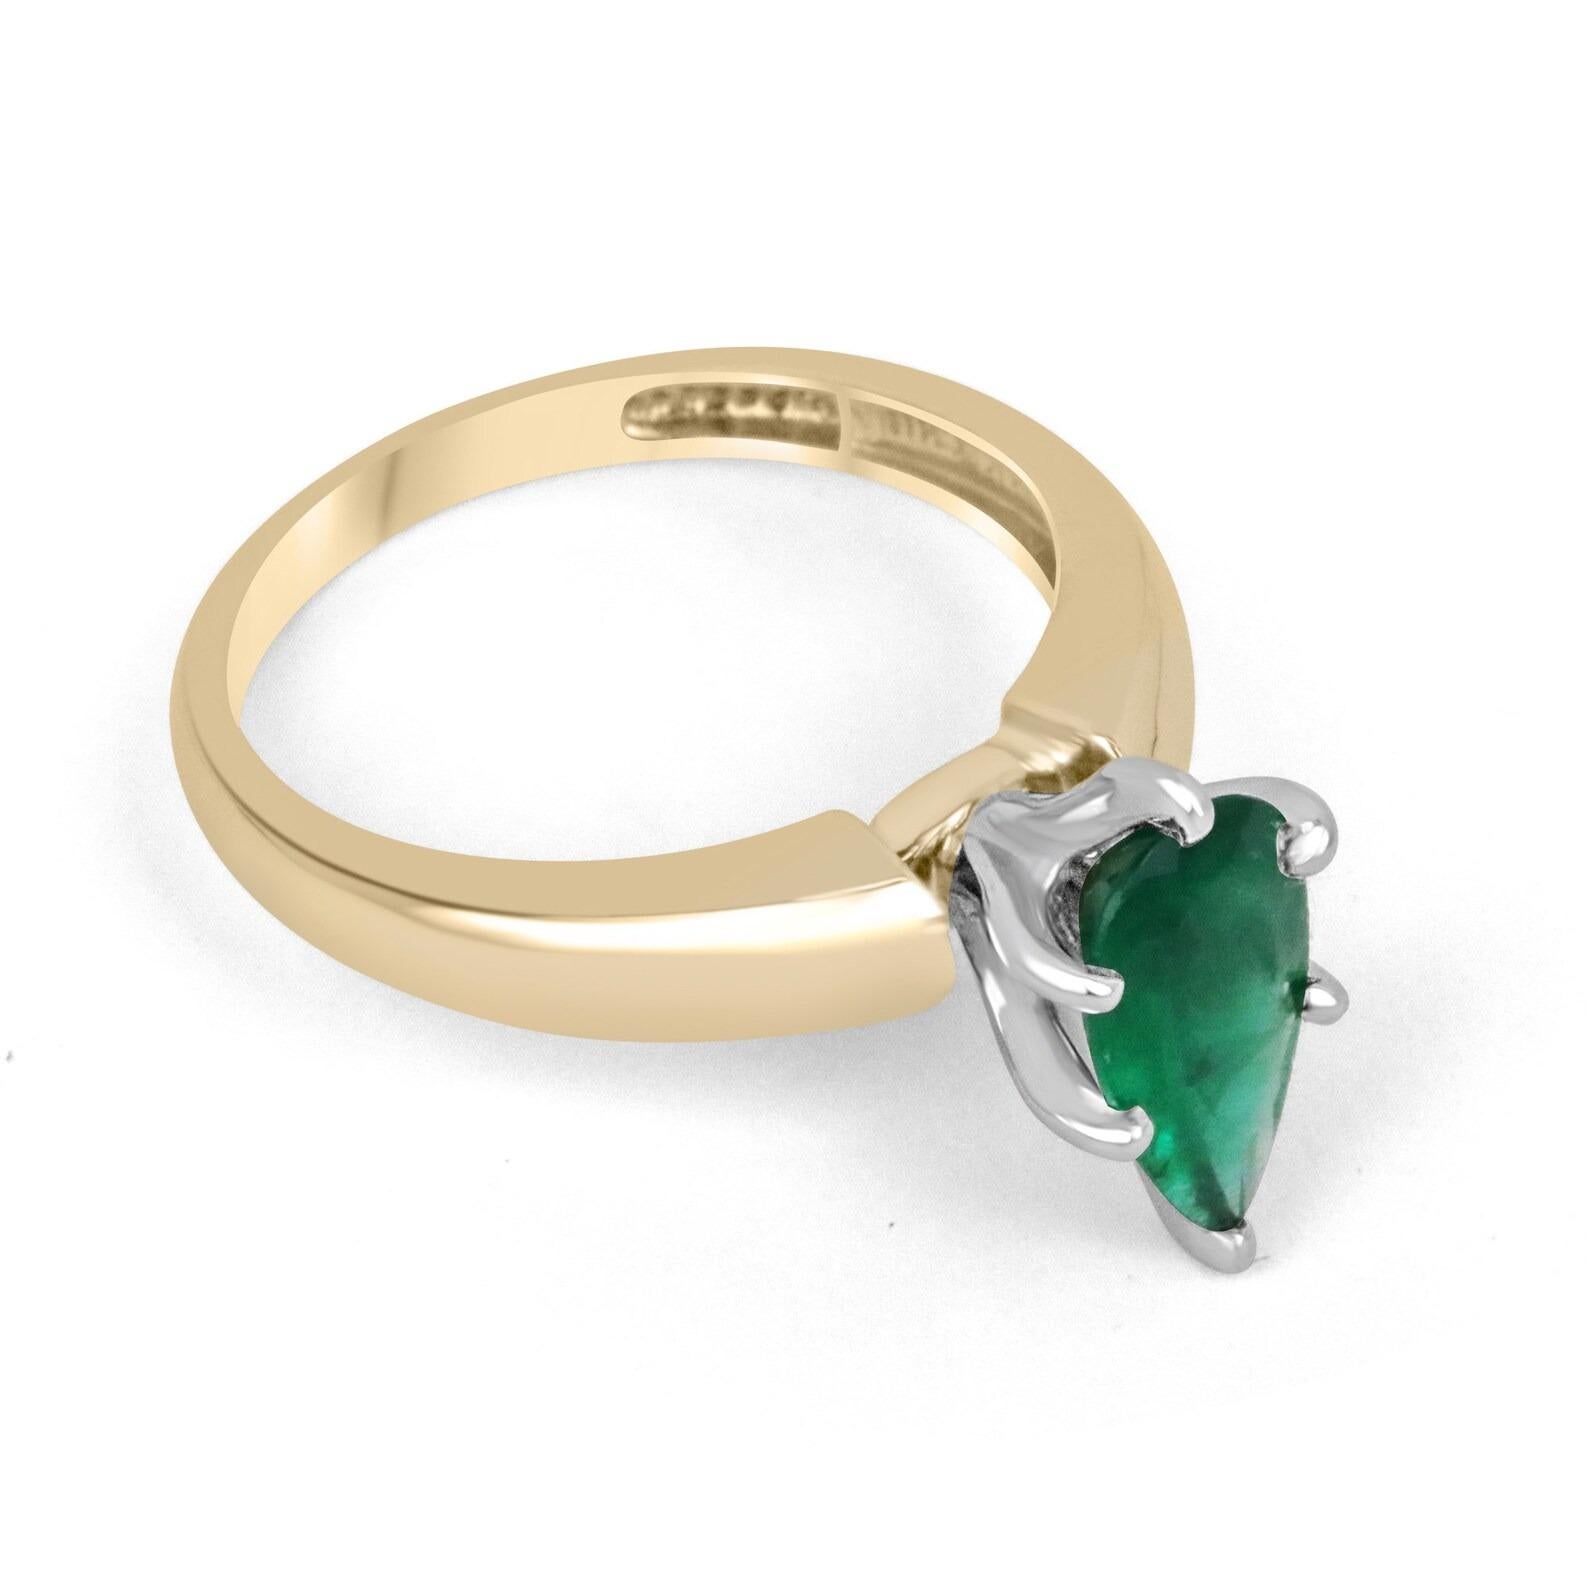 Displayed is a custom emerald solitaire pear-cut engagement/right-hand ring in 14K yellow gold. This gorgeous solitaire ring carries a 1.06-carat emerald in a six-prong setting. The emerald has very good clarity with minor flaws that are normal in